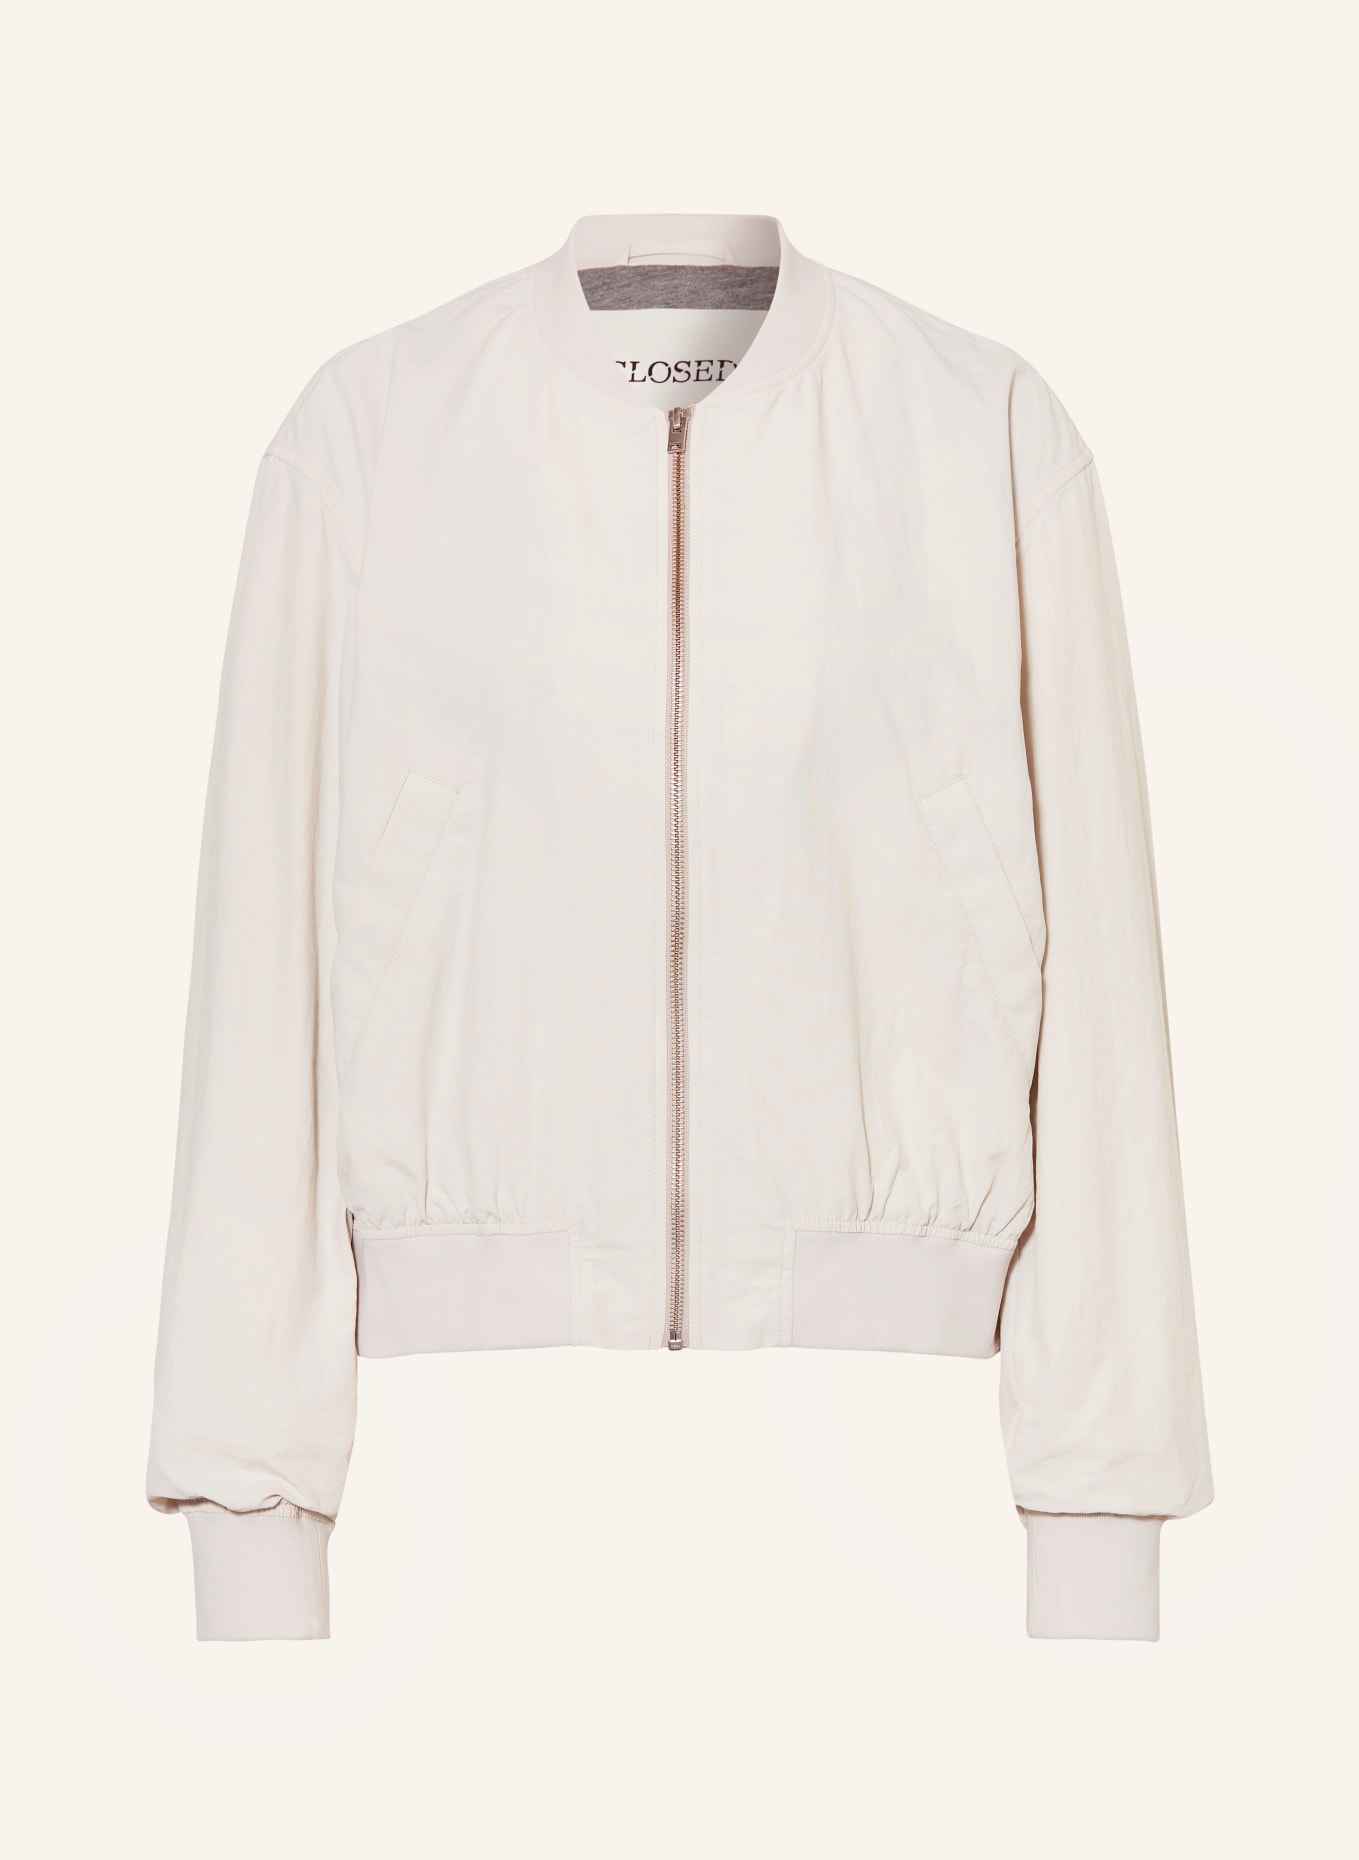 CLOSED Bomber jacket, Color: LIGHT GRAY (Image 1)